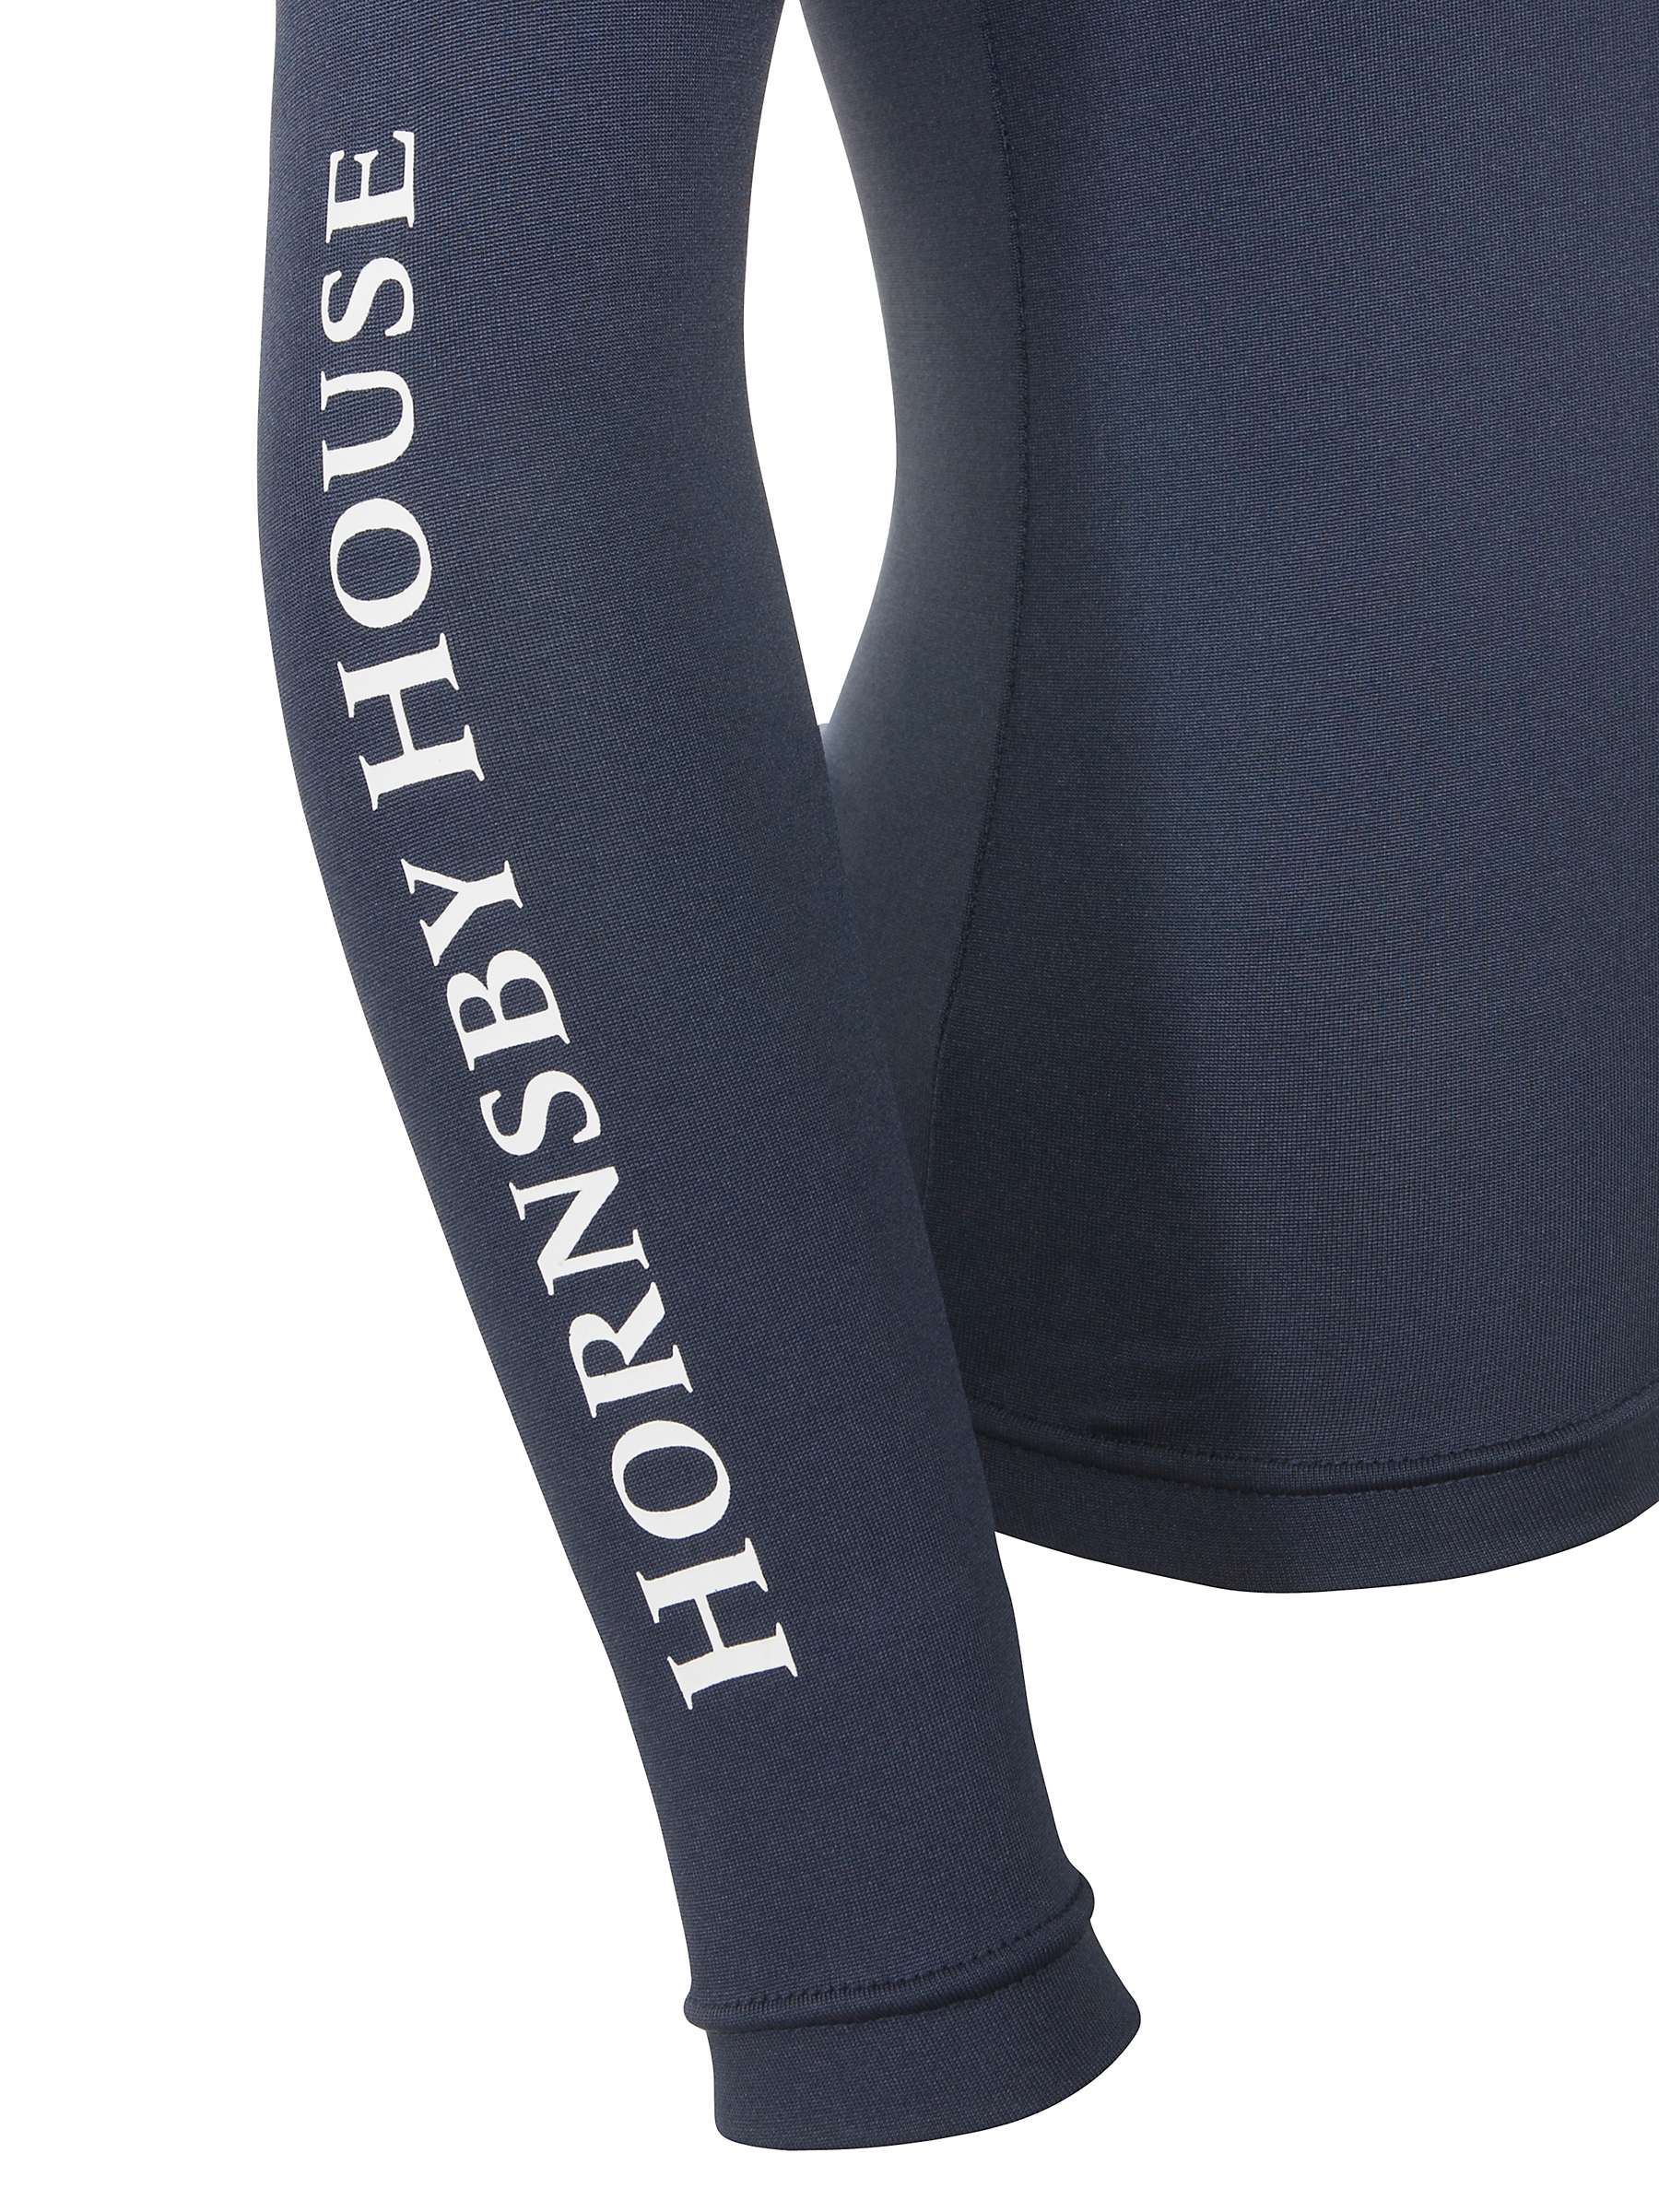 Buy Hornsby House School Unisex Baselayer, Navy Blue Online at johnlewis.com